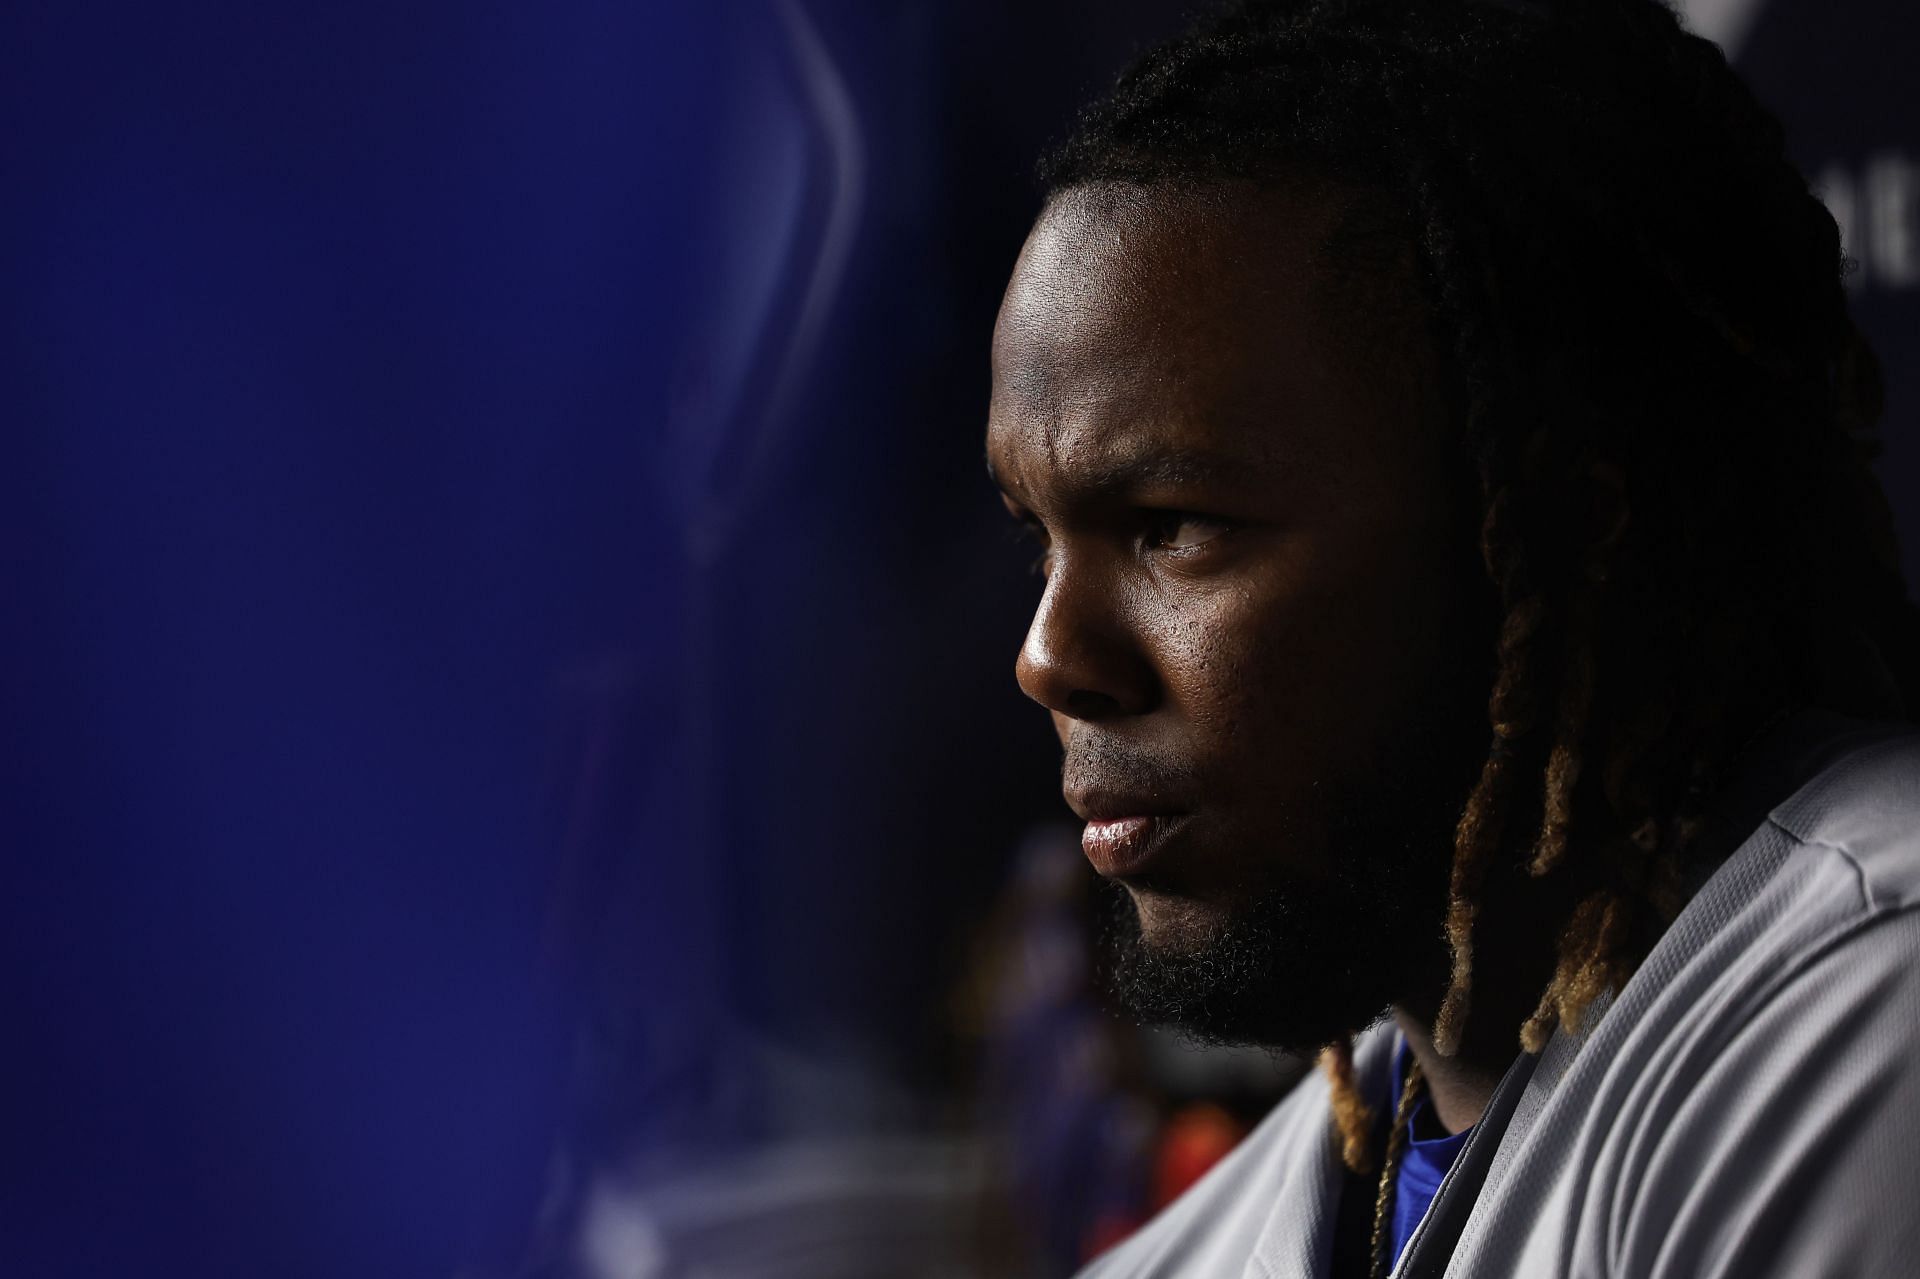 Toronto Blue Jays will be hoping Guerrero Jr. continues his good form